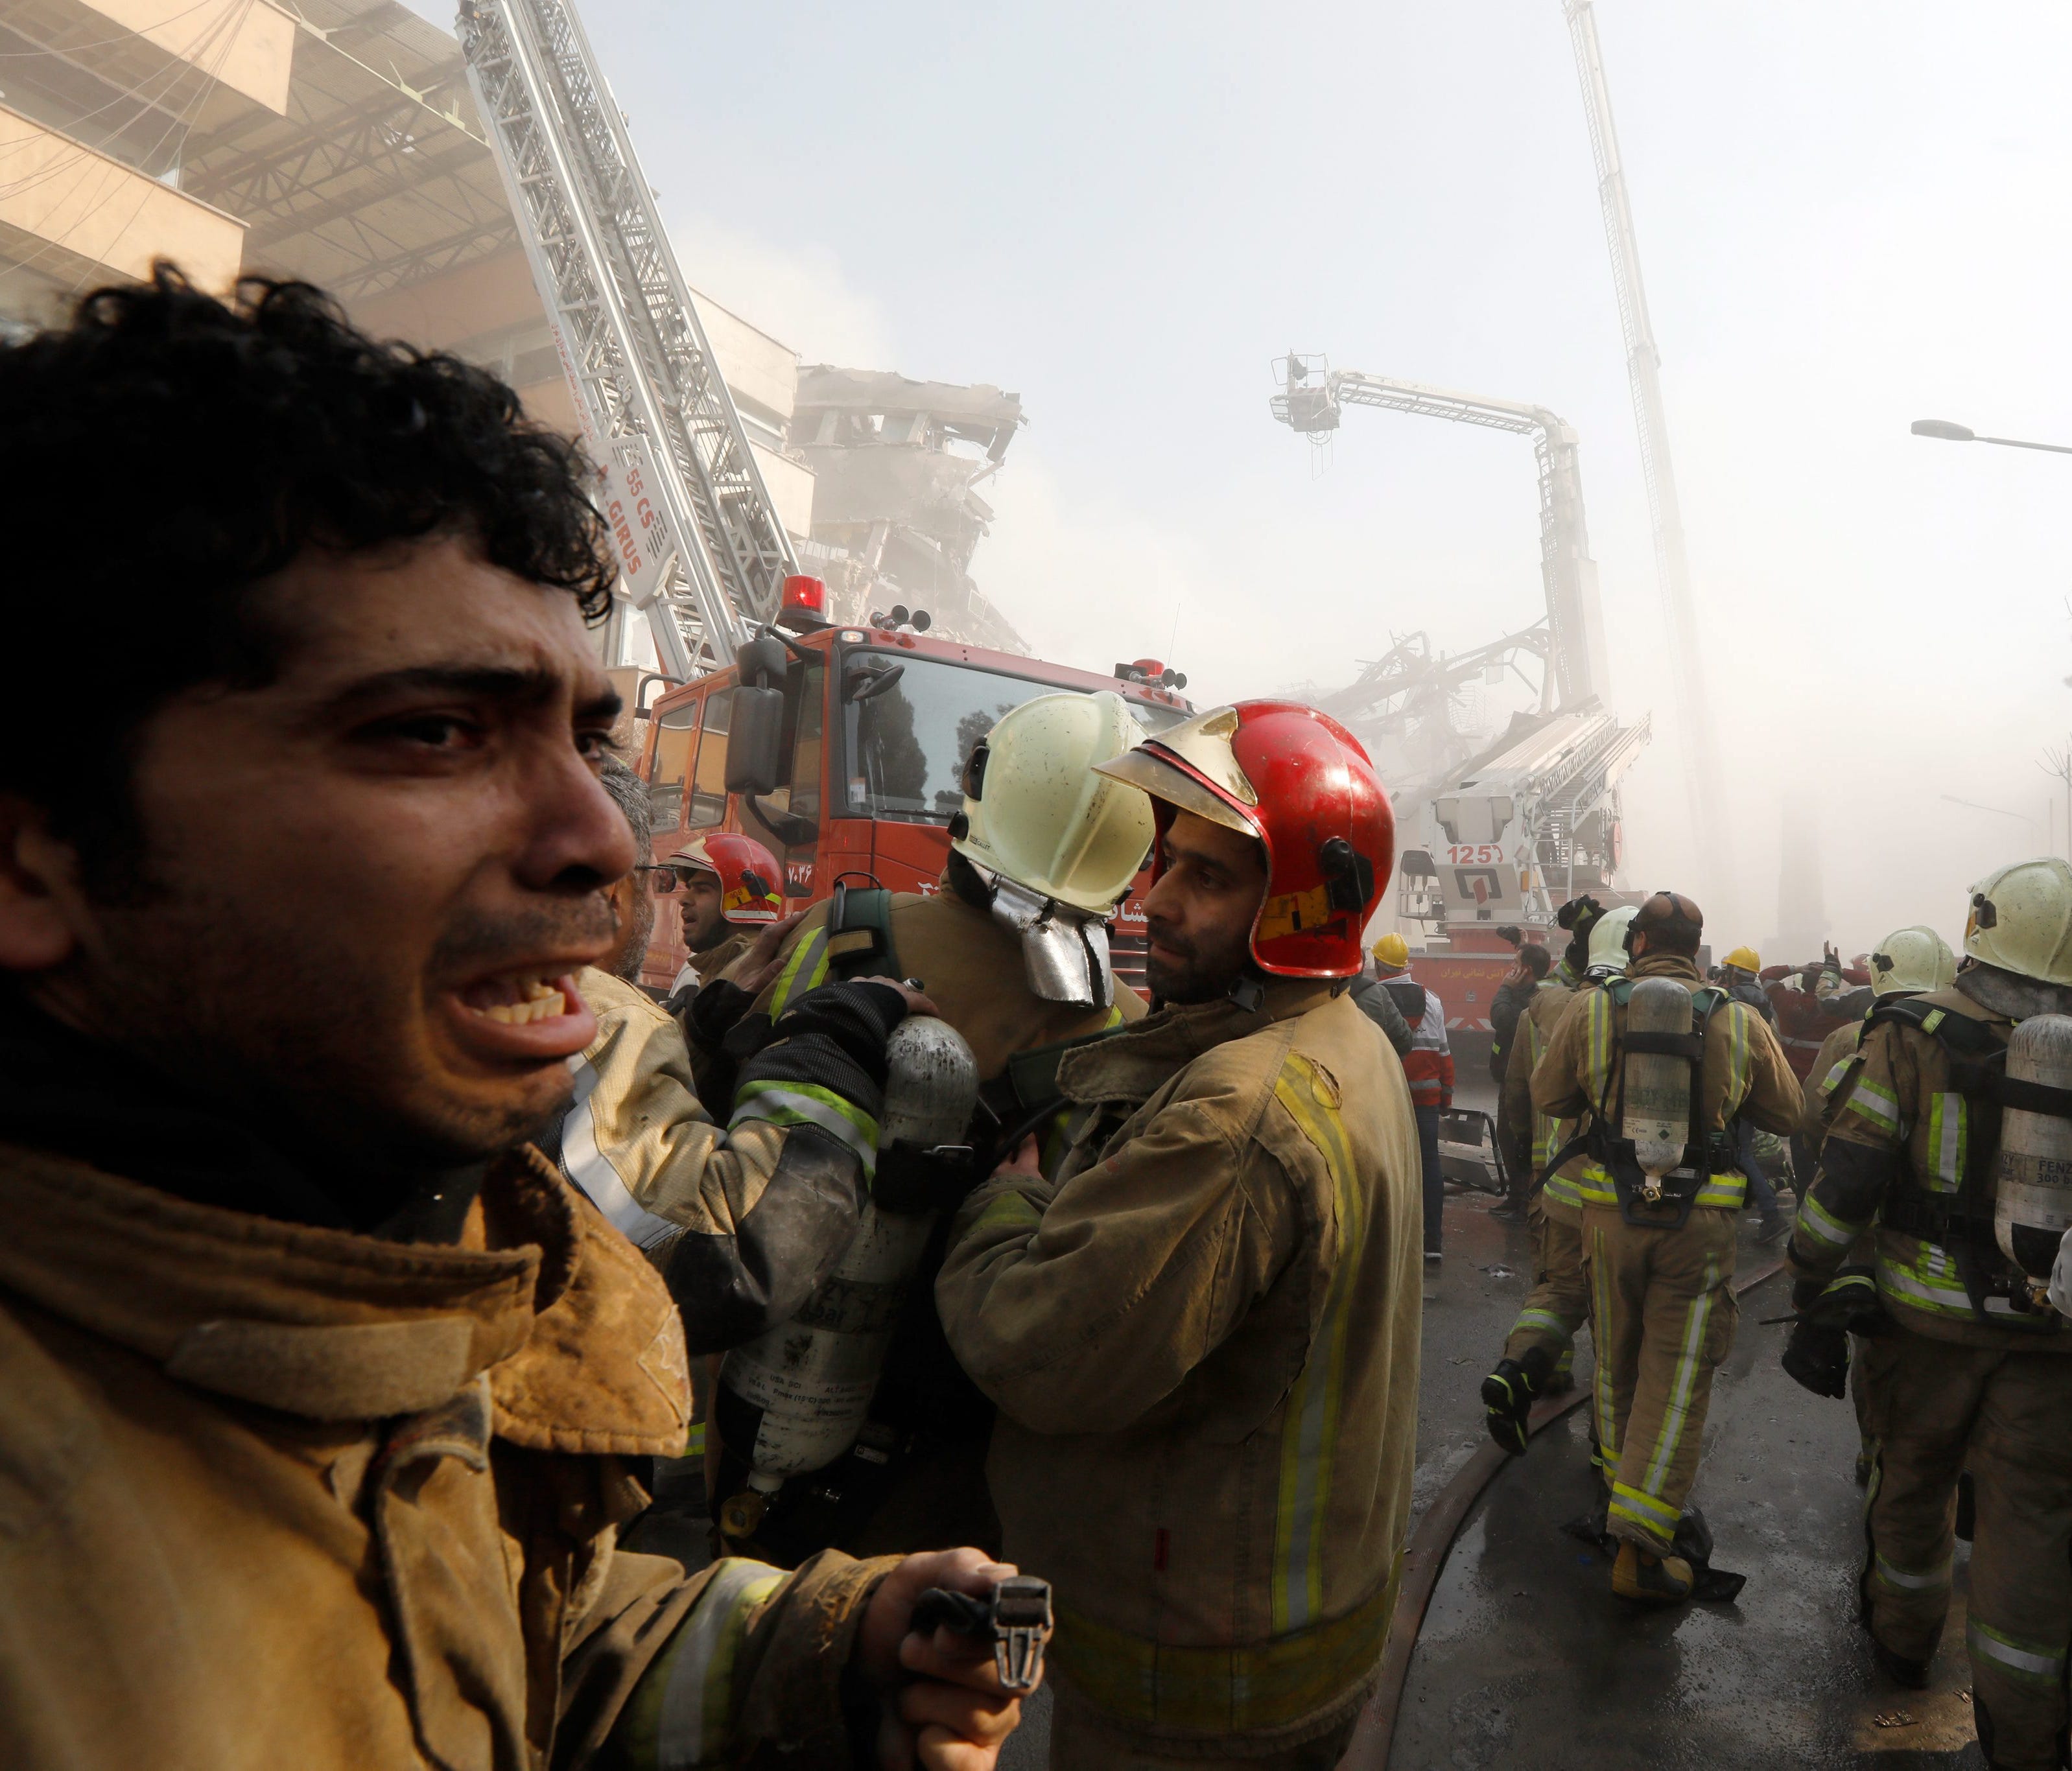 An Iranian fire fighter cry as other prepare as the iconic Plasco building collapses after a fire in Tehran, Iran, Jan. 19, 2017.